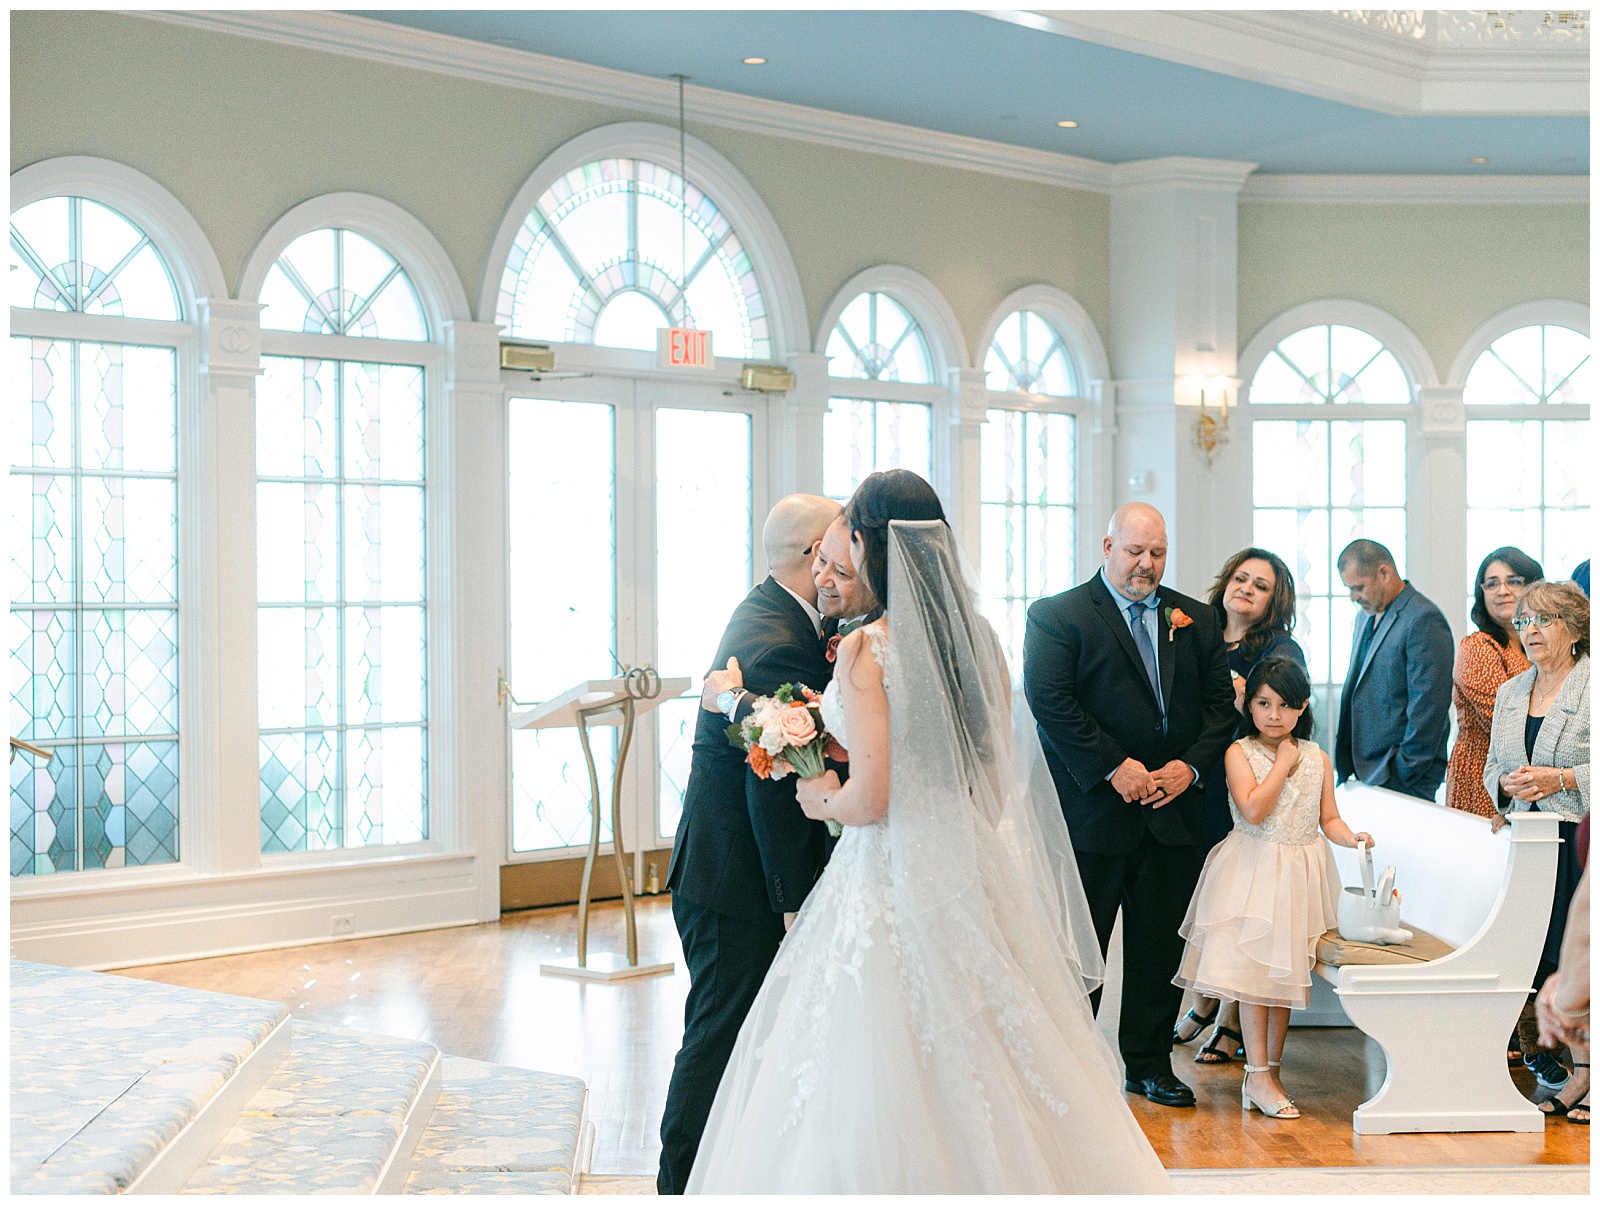 Bride watches as groom and father of the bride embrace during the traditional handing over of the bride. By Elizabeth Kane Photography in Orlando Florida